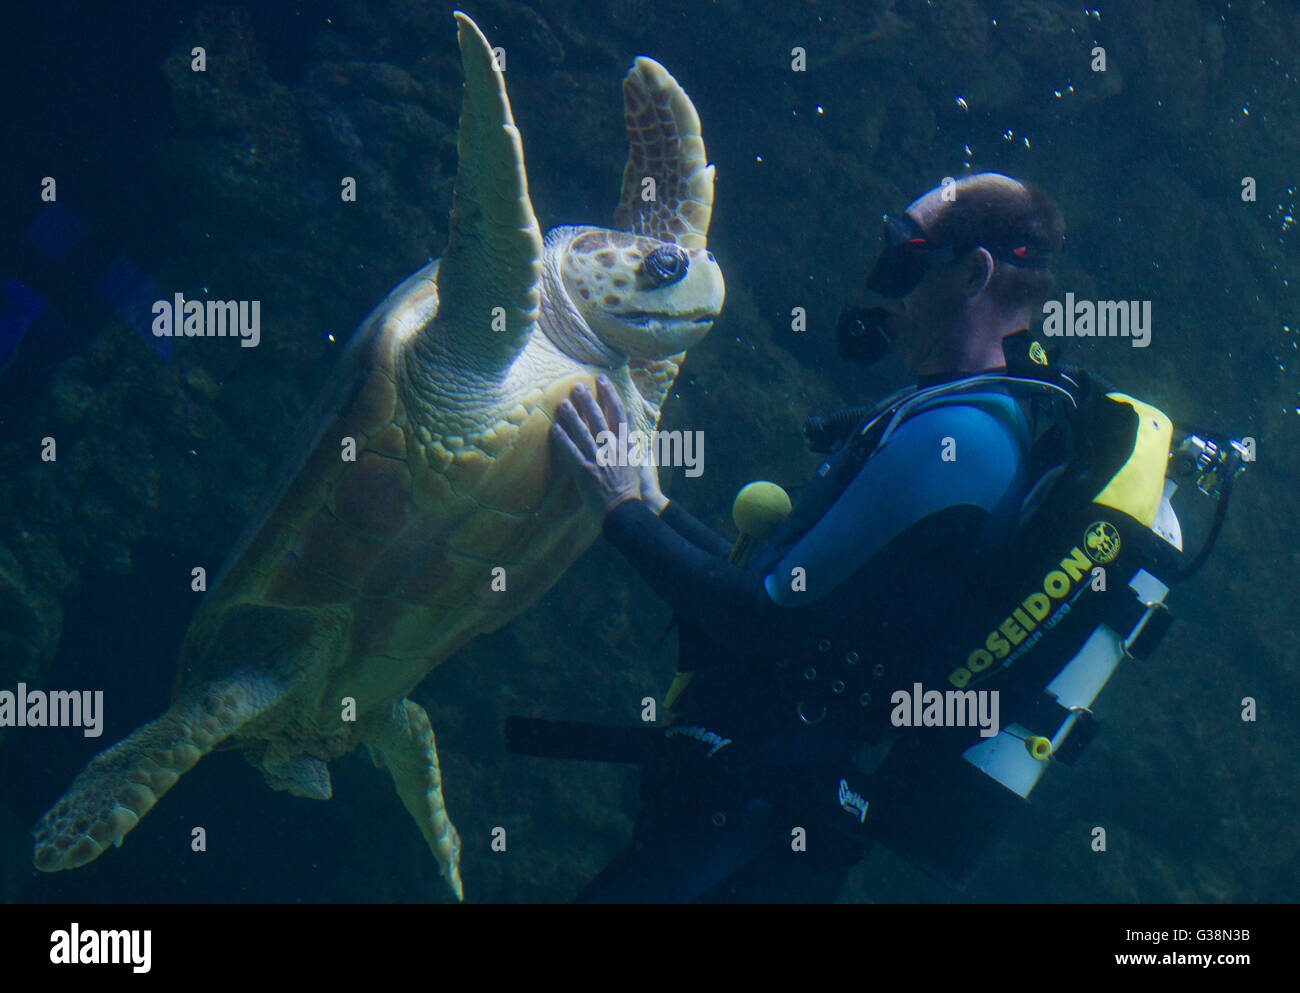 Stralsund, Germany. 09th June, 2016. A diver plays with a loggerhead sea turtle in the German Oceanographic Museum in Stralsund, Germany, 09 June 2016. The 'Aida Freunde der Meere' foundation took over sponsorship for a 33-year-old green sea turtle and christened her with the name Frieda. The sponsorship is attached to an annual contribution of 1000 euros, which will go towards the sea turtle and her keeping. Photo: STEFAN SAUER/dpa/Alamy Live News Stock Photo